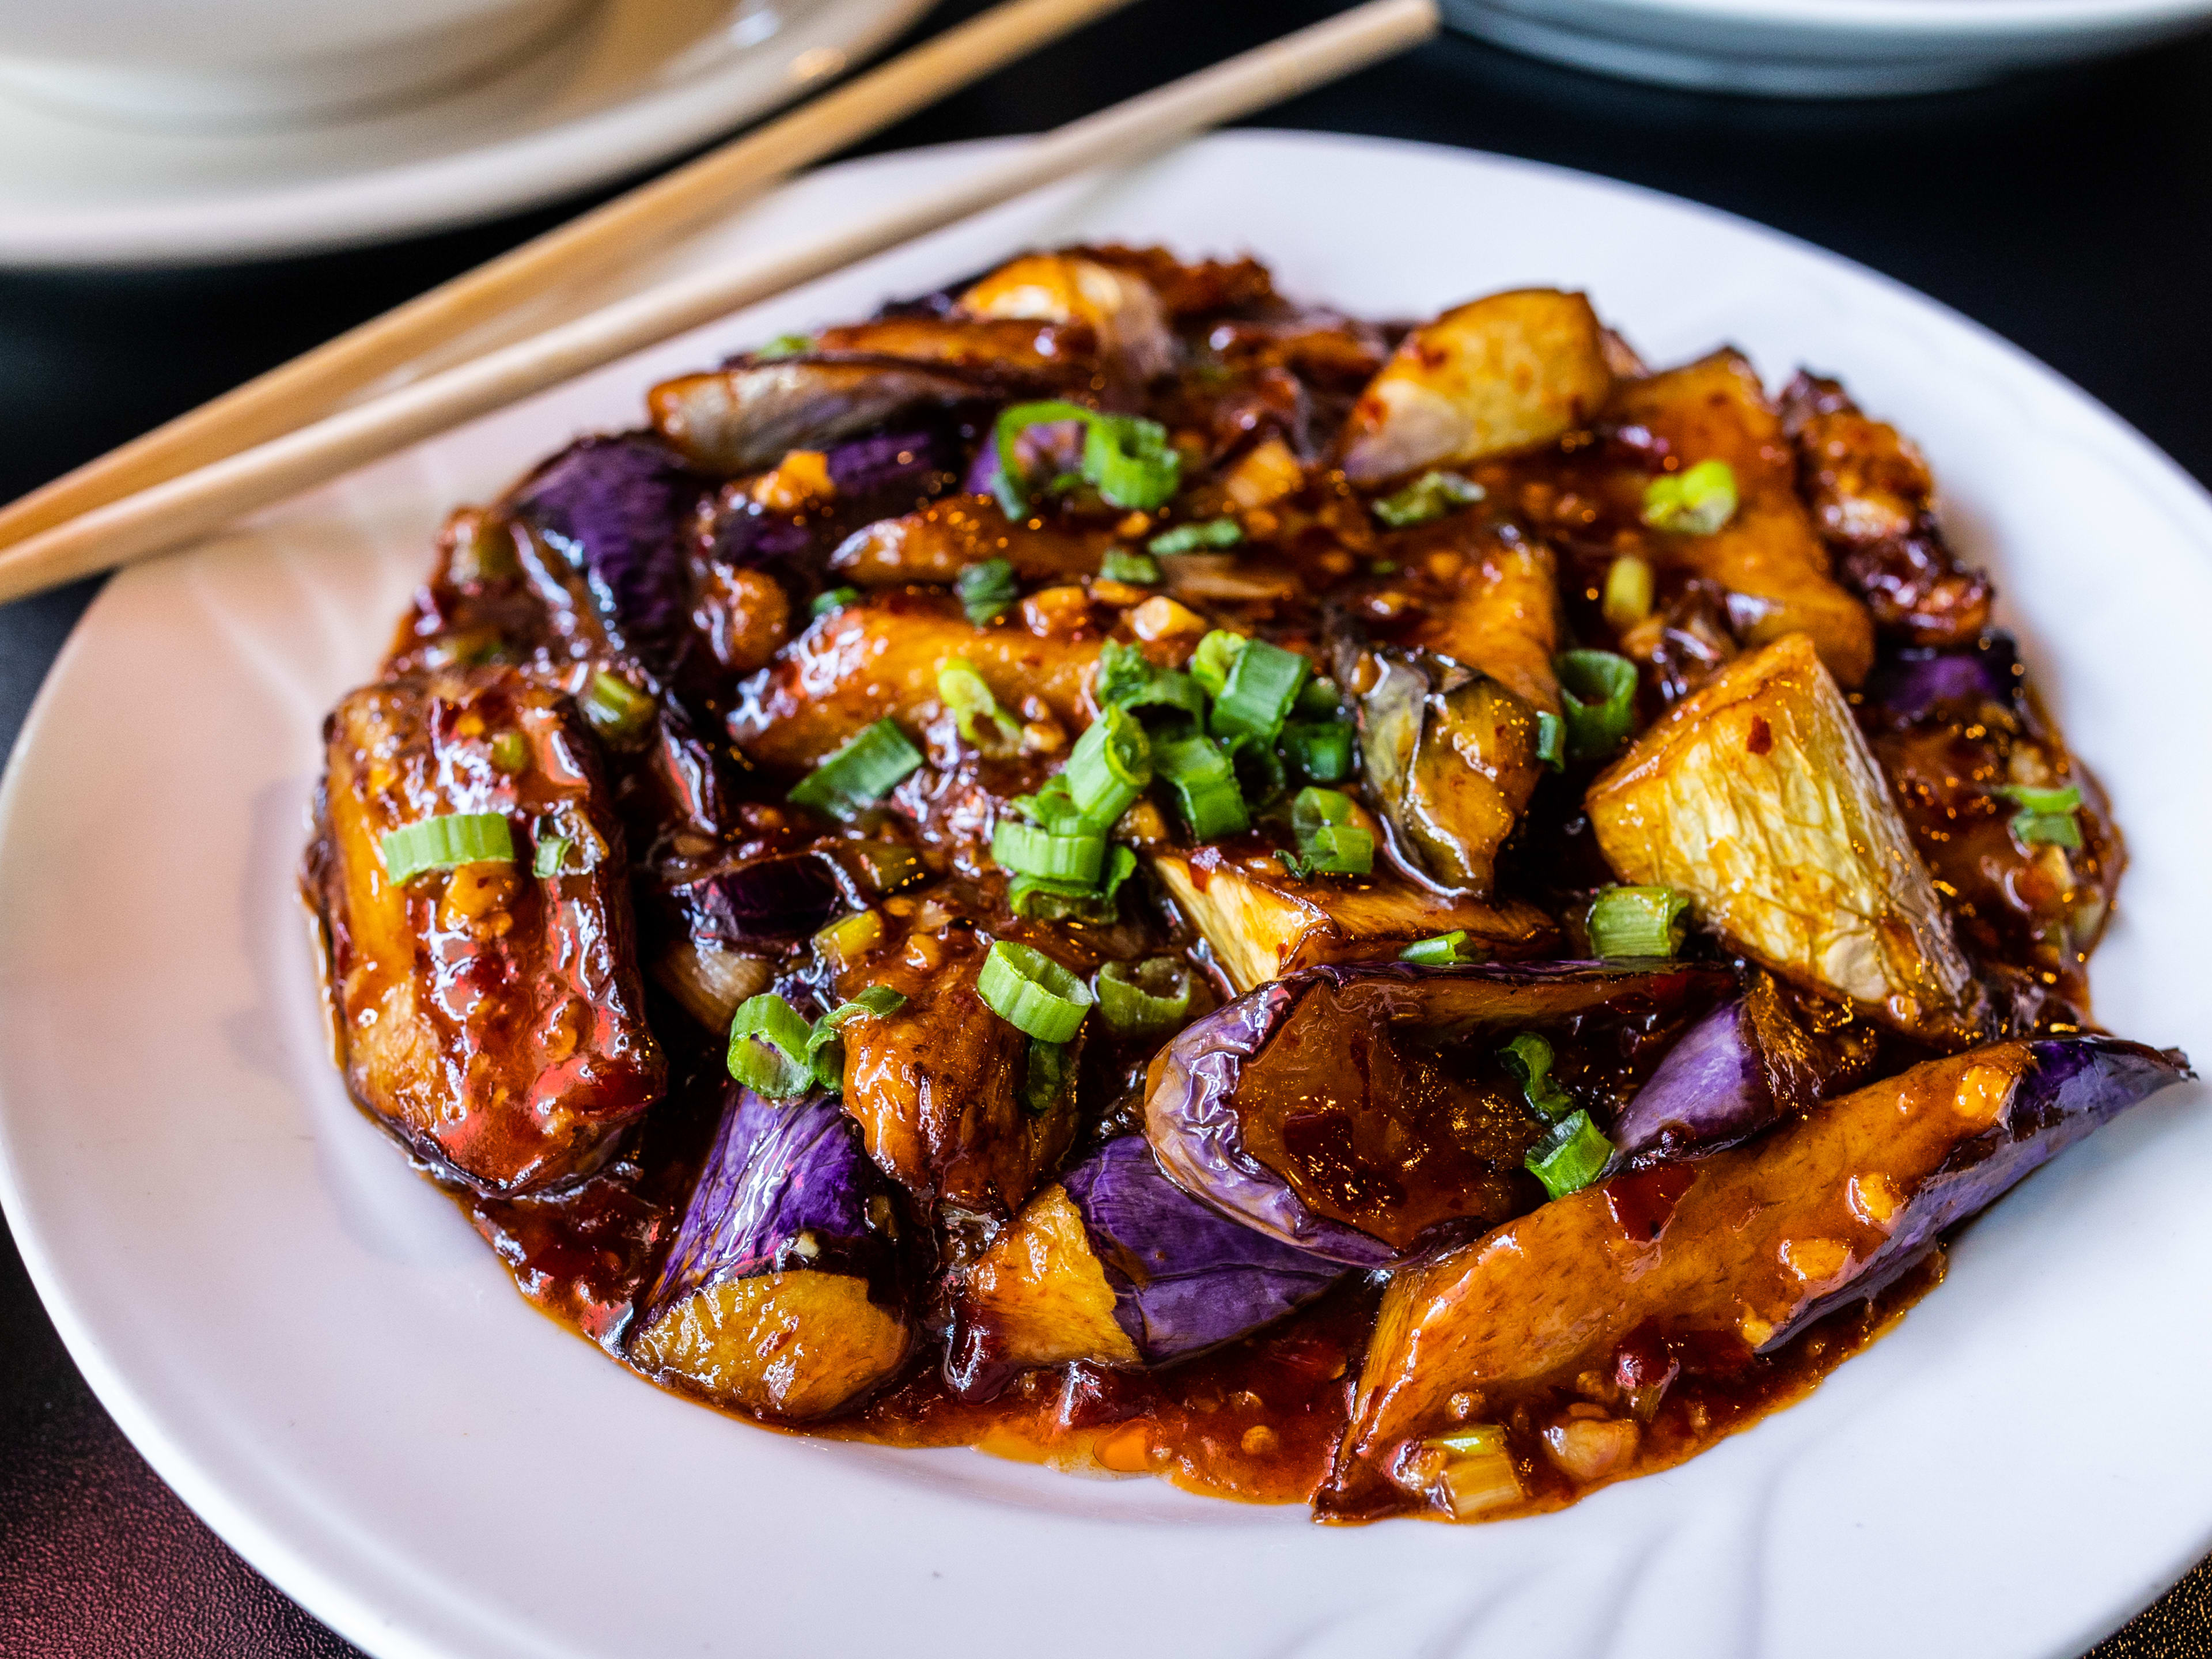 The eggplant in garlic sauce from House Of Three Gorges.